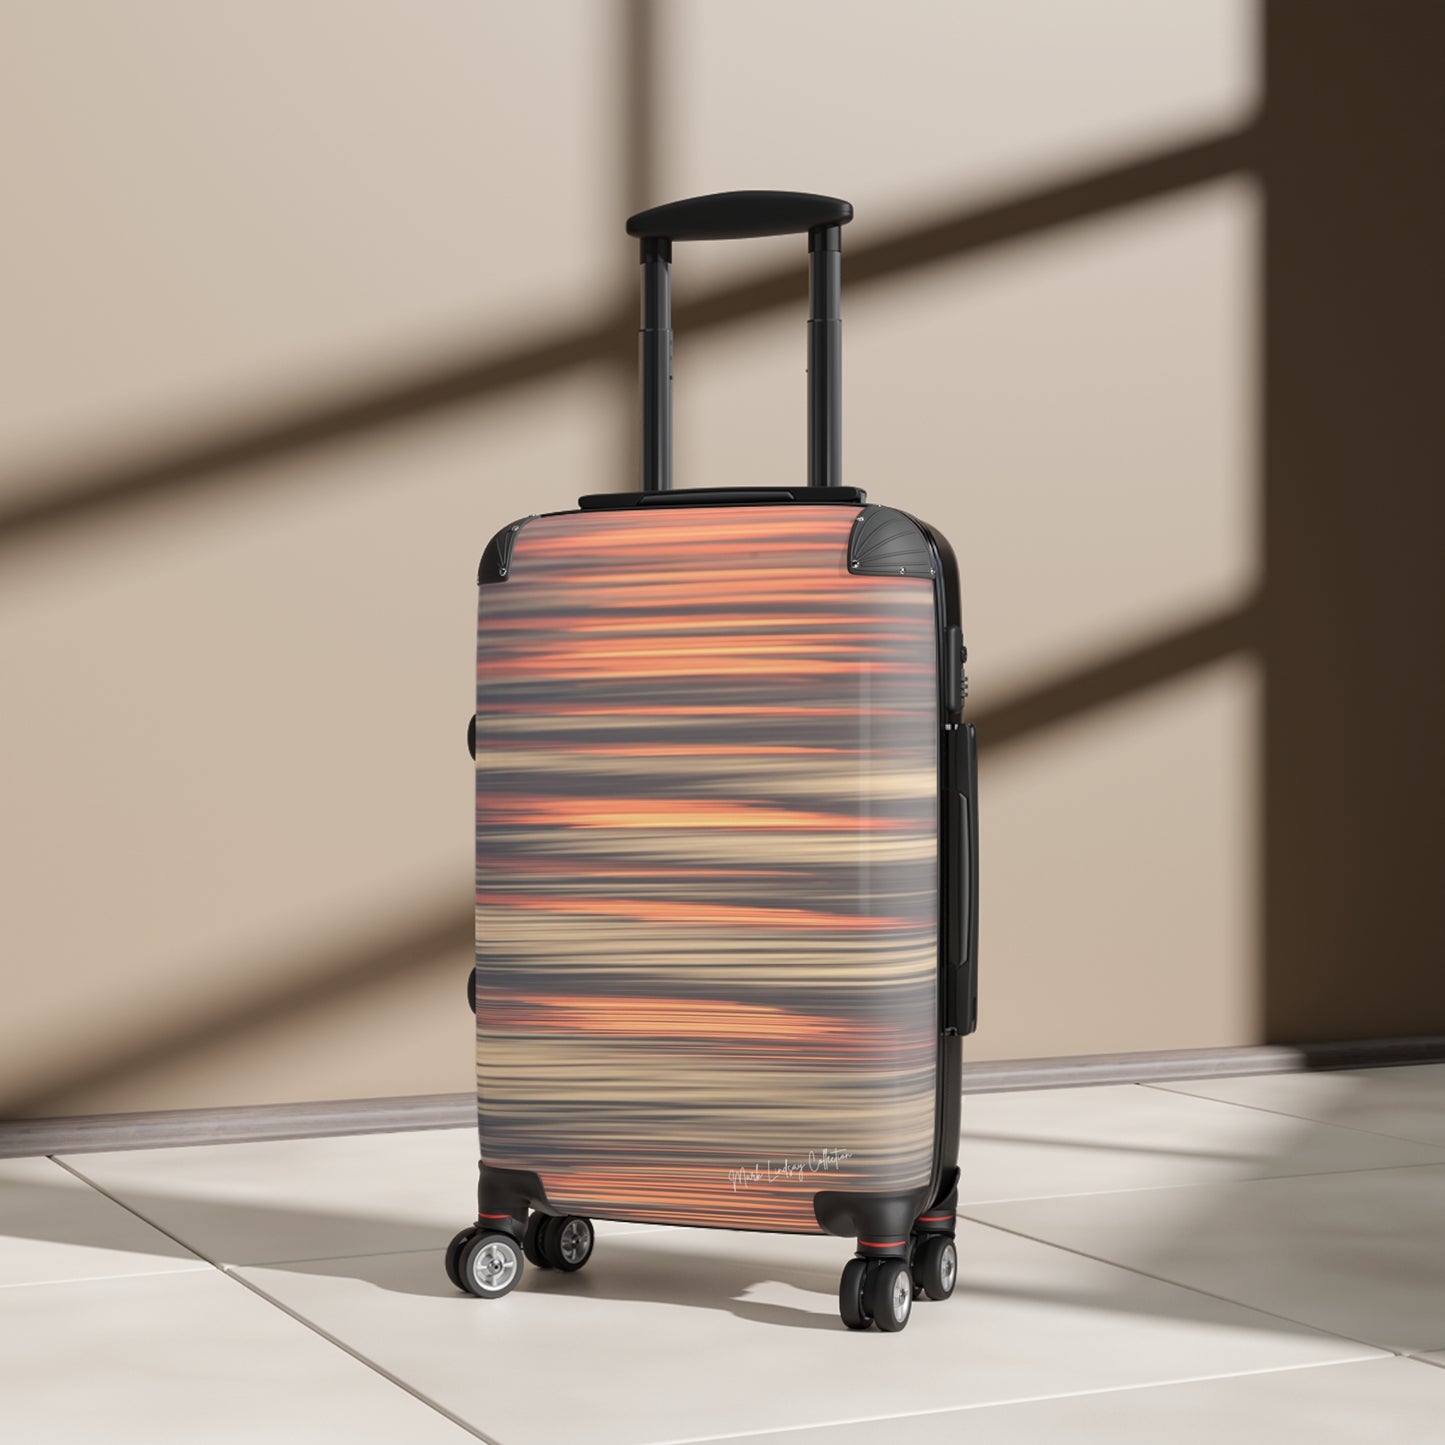 Sunset's Reflections and Ripples Custom Art Luggage